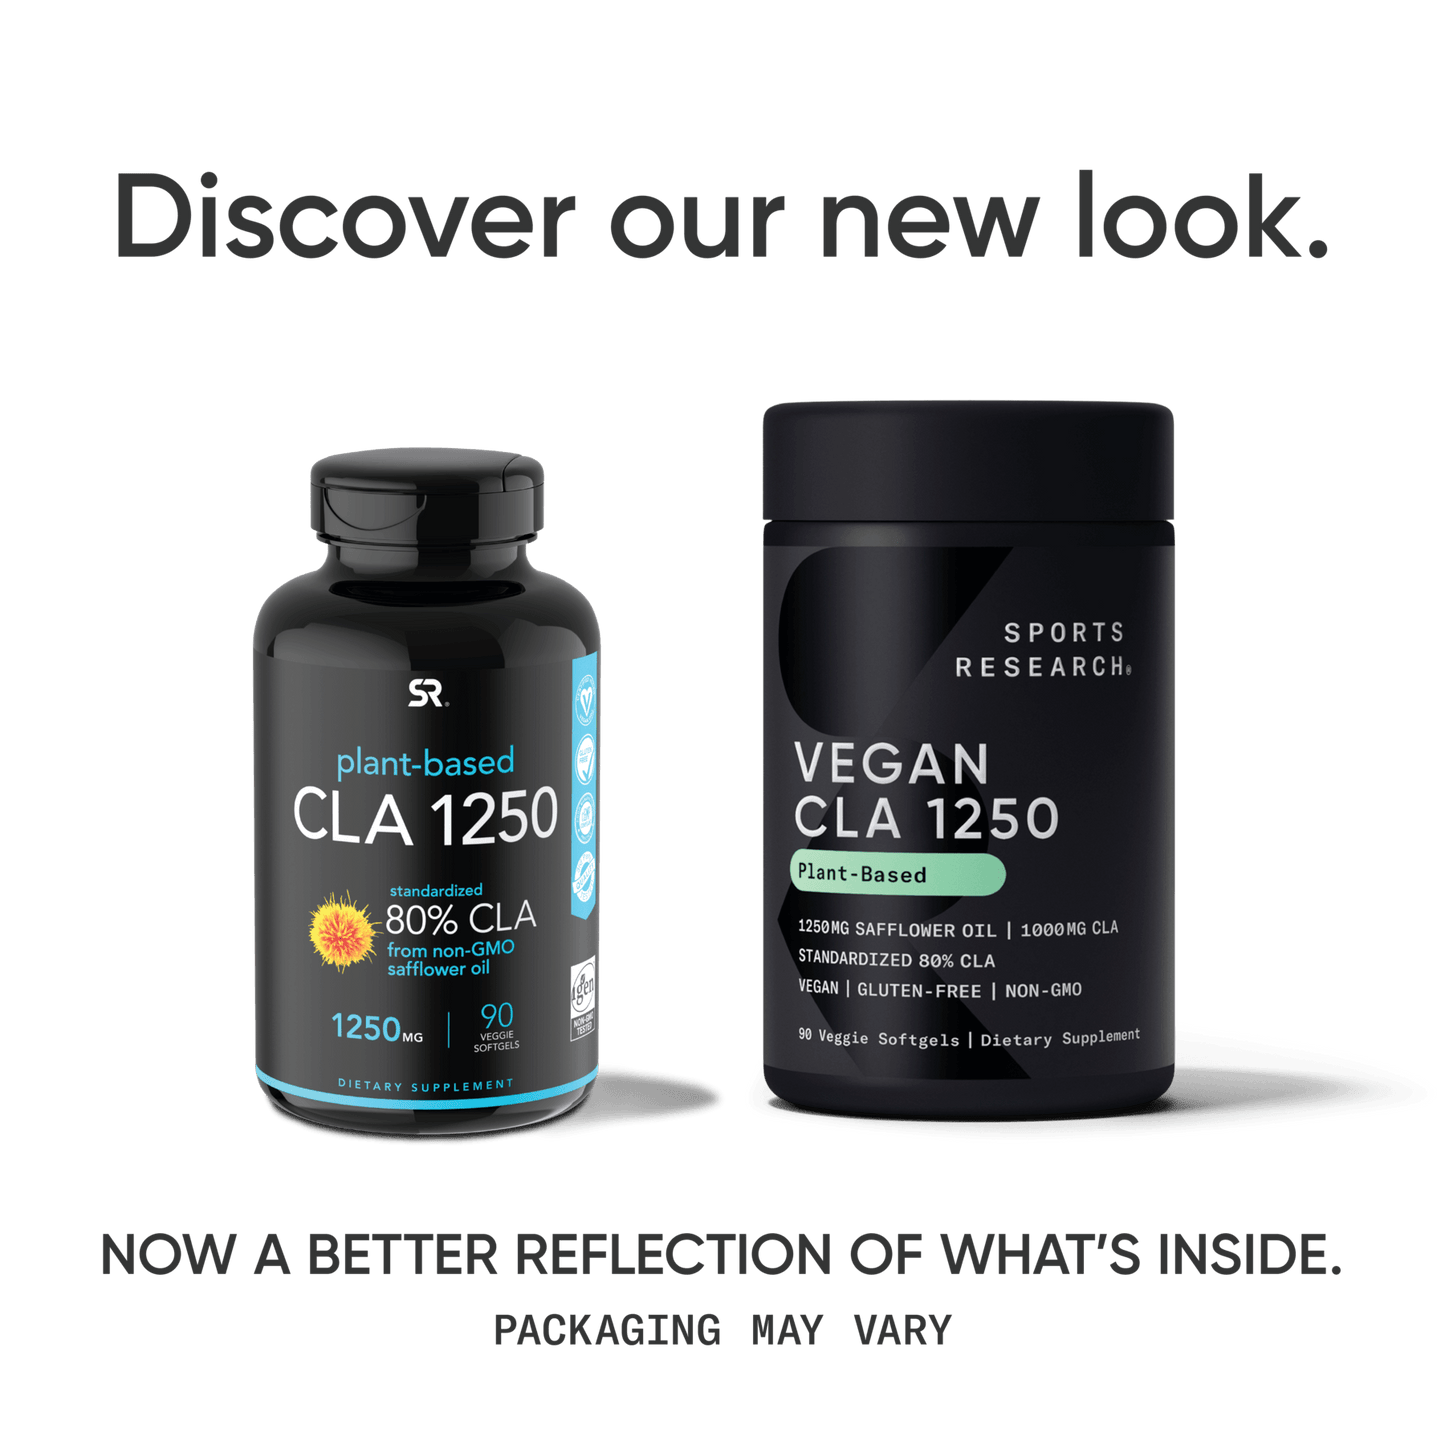 a bottle of Sports Research Vegan CLA 1250 and a bottle of Sports Research Vegan CLA 1250